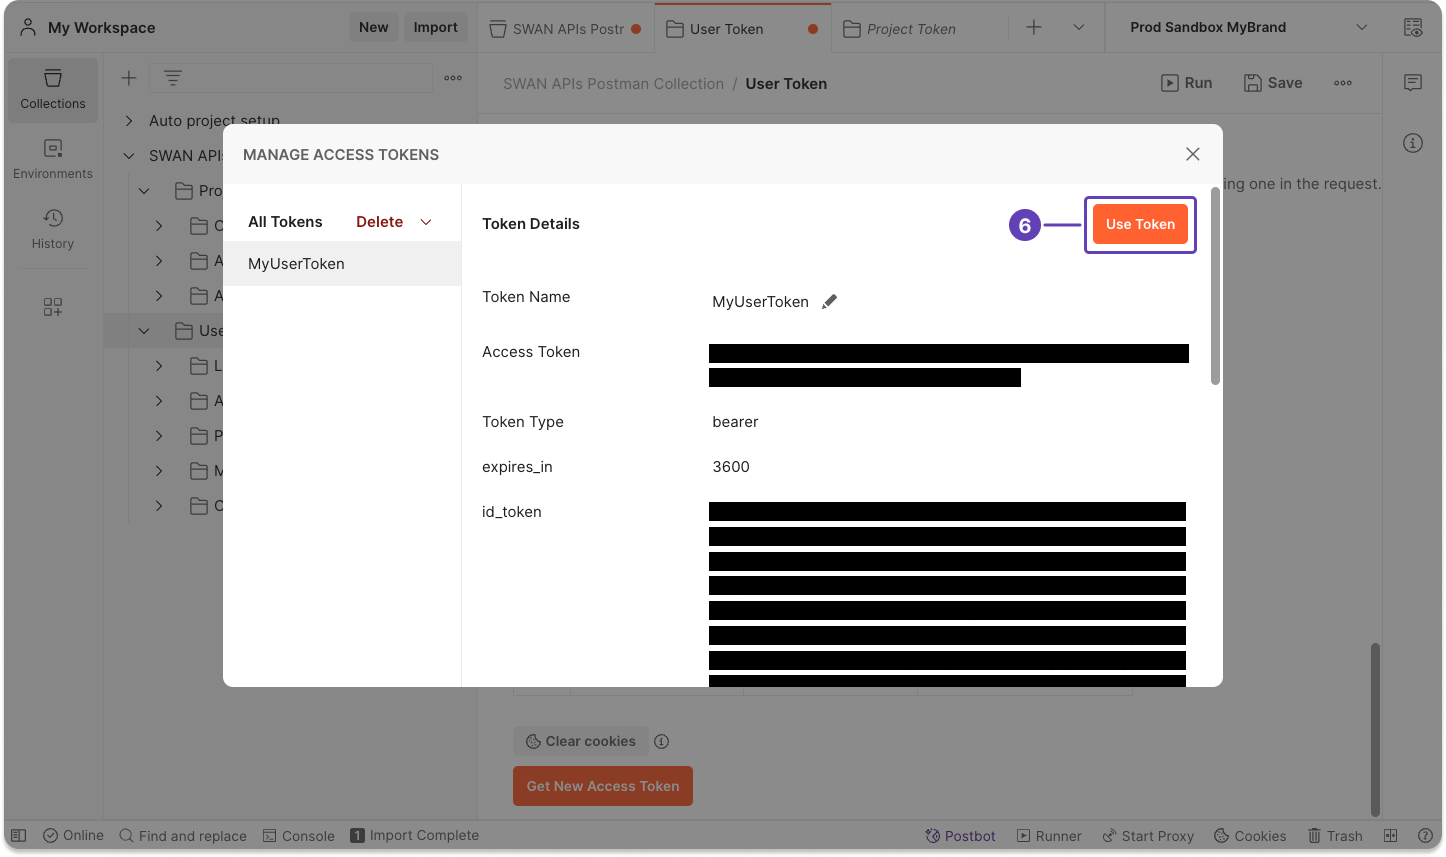 Image of Postman guiding user to use the new user access token